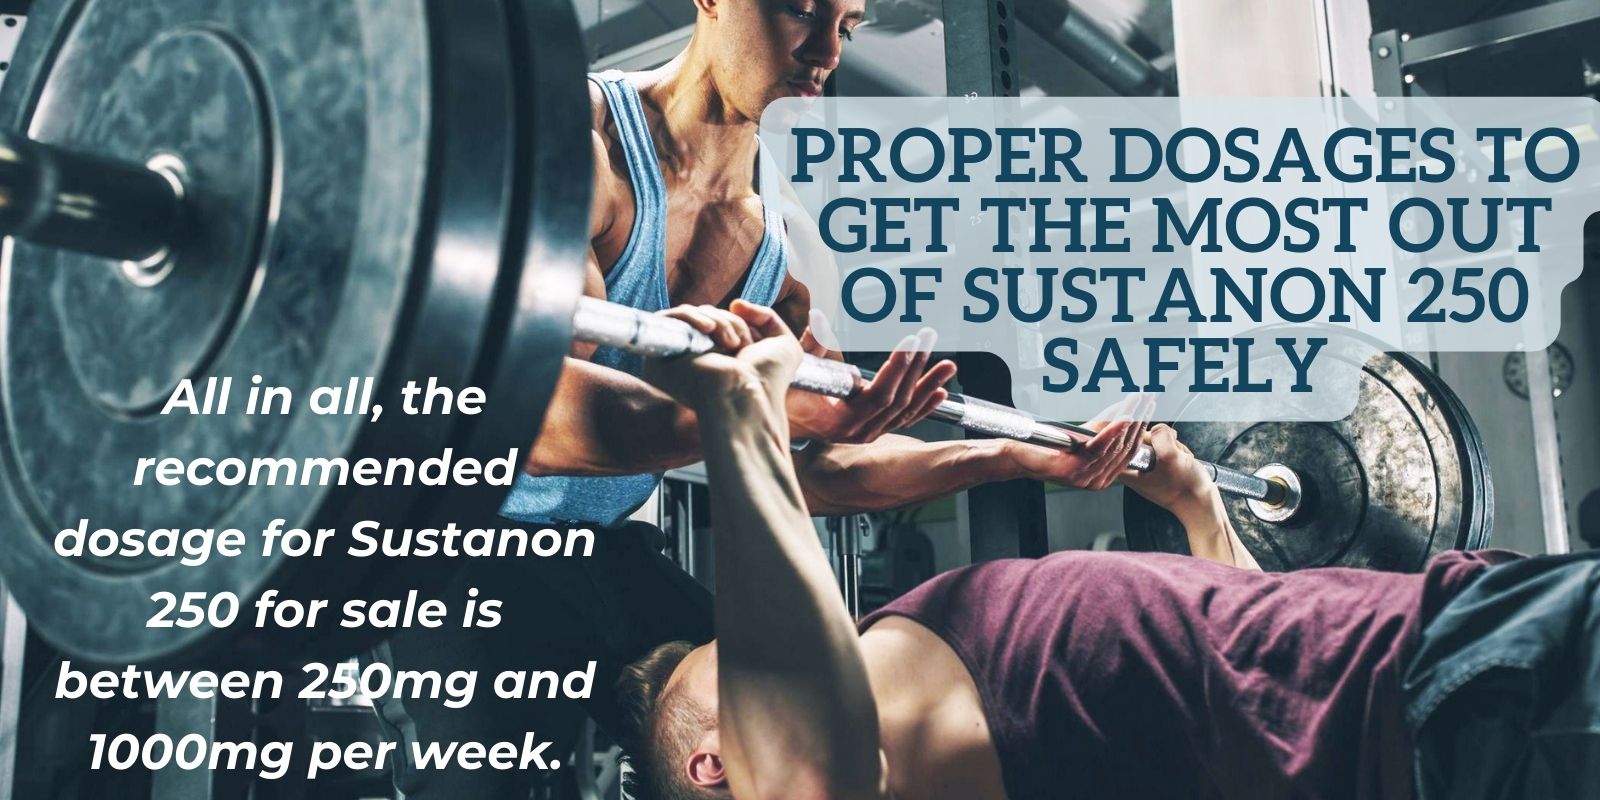 Proper dosages to get the most out of Sustanon 250 safely